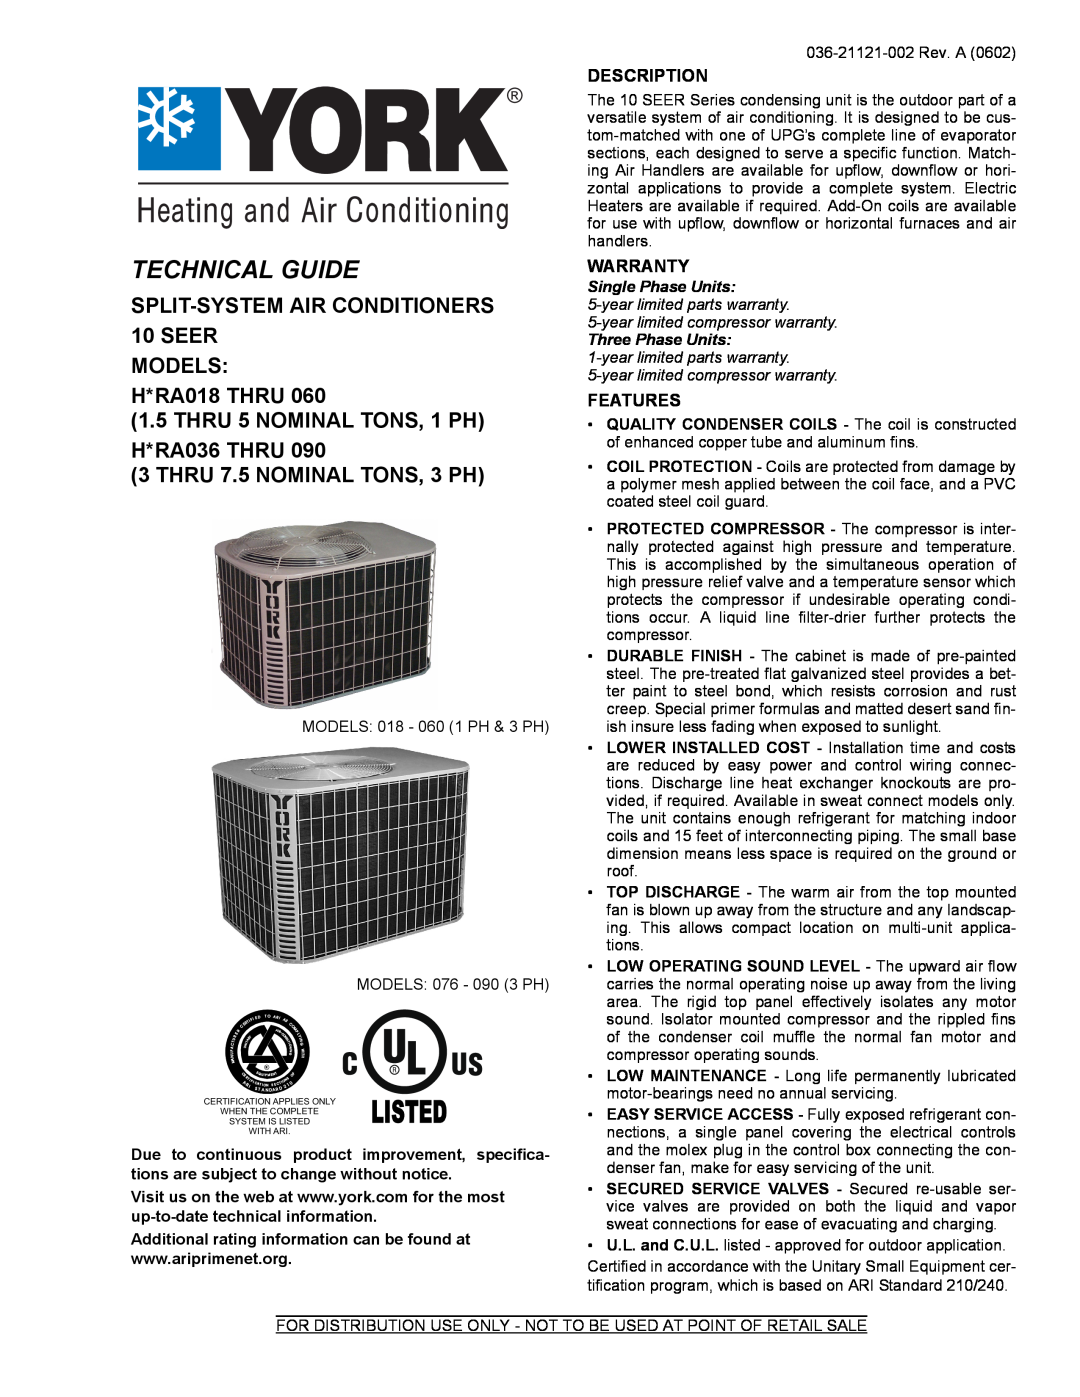 York H*RA036 THRU 090 warranty Description, Warranty, Features, Technical Guide, Single Phase Units, Three Phase Units 